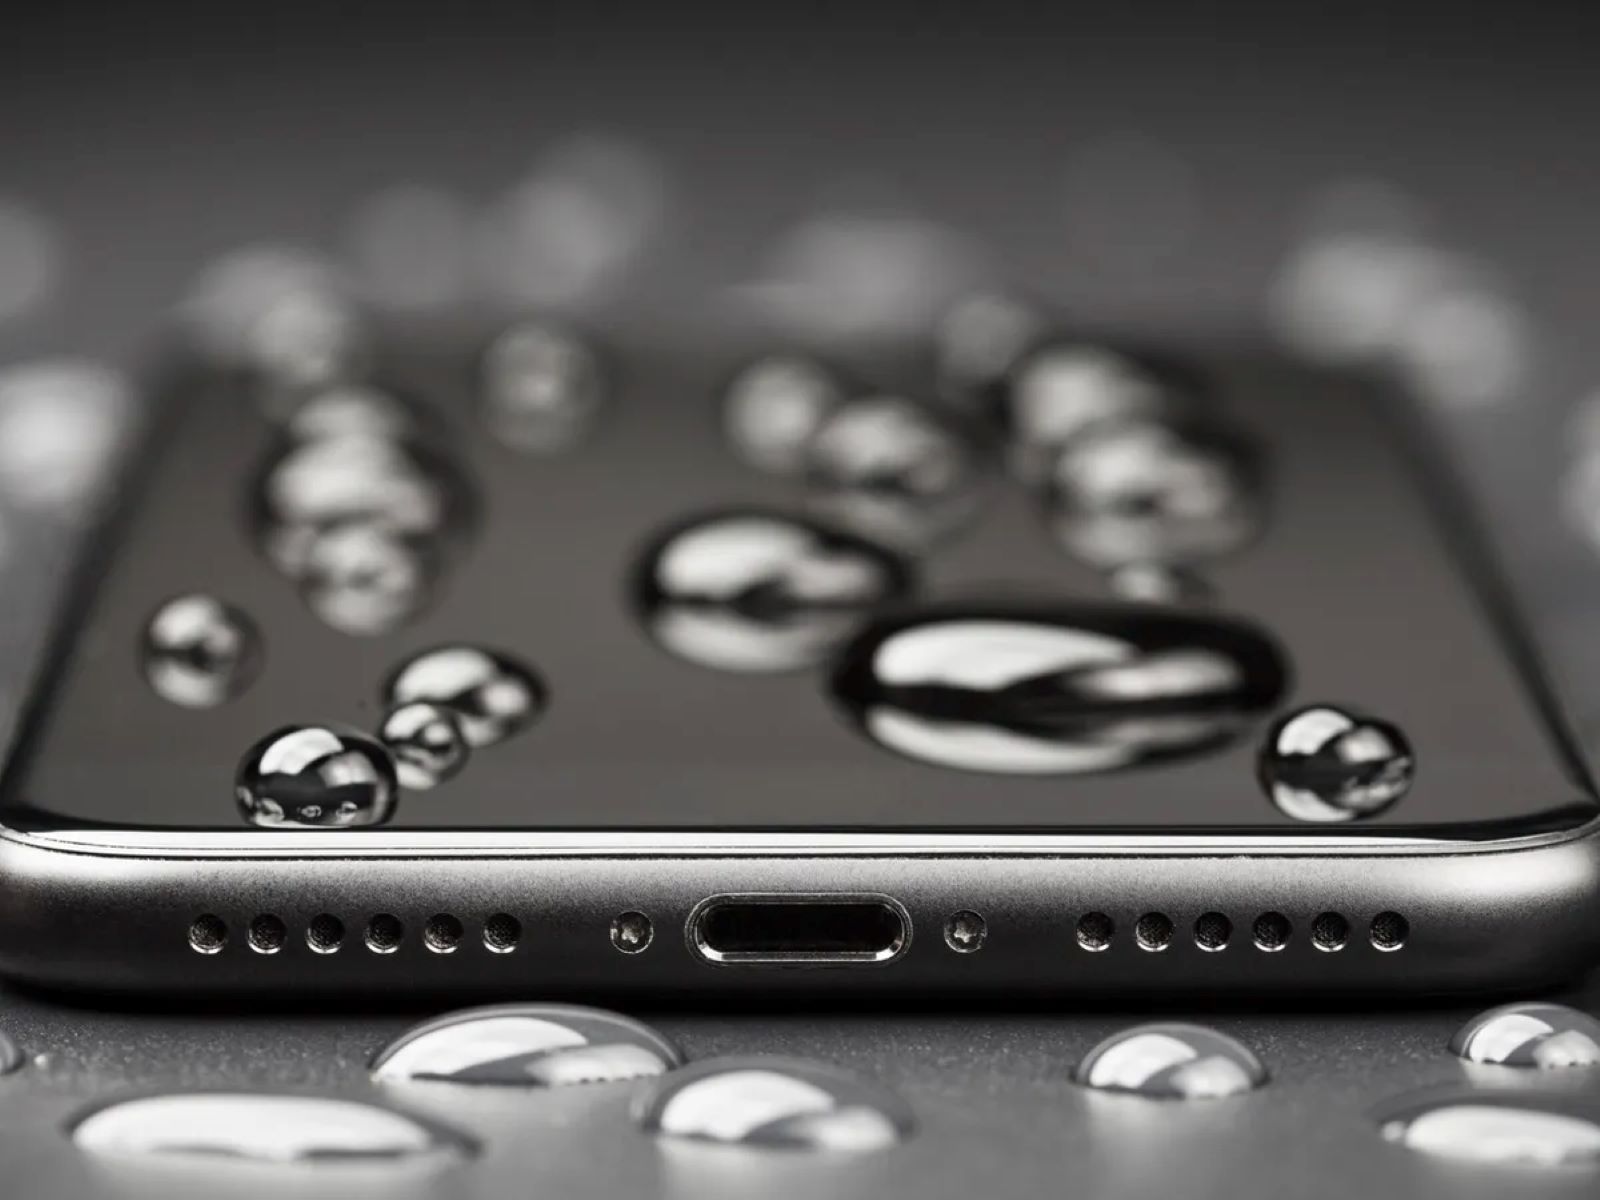 Water Damage Indicators: Identifying Signs Of Water Damage On IPhone 11